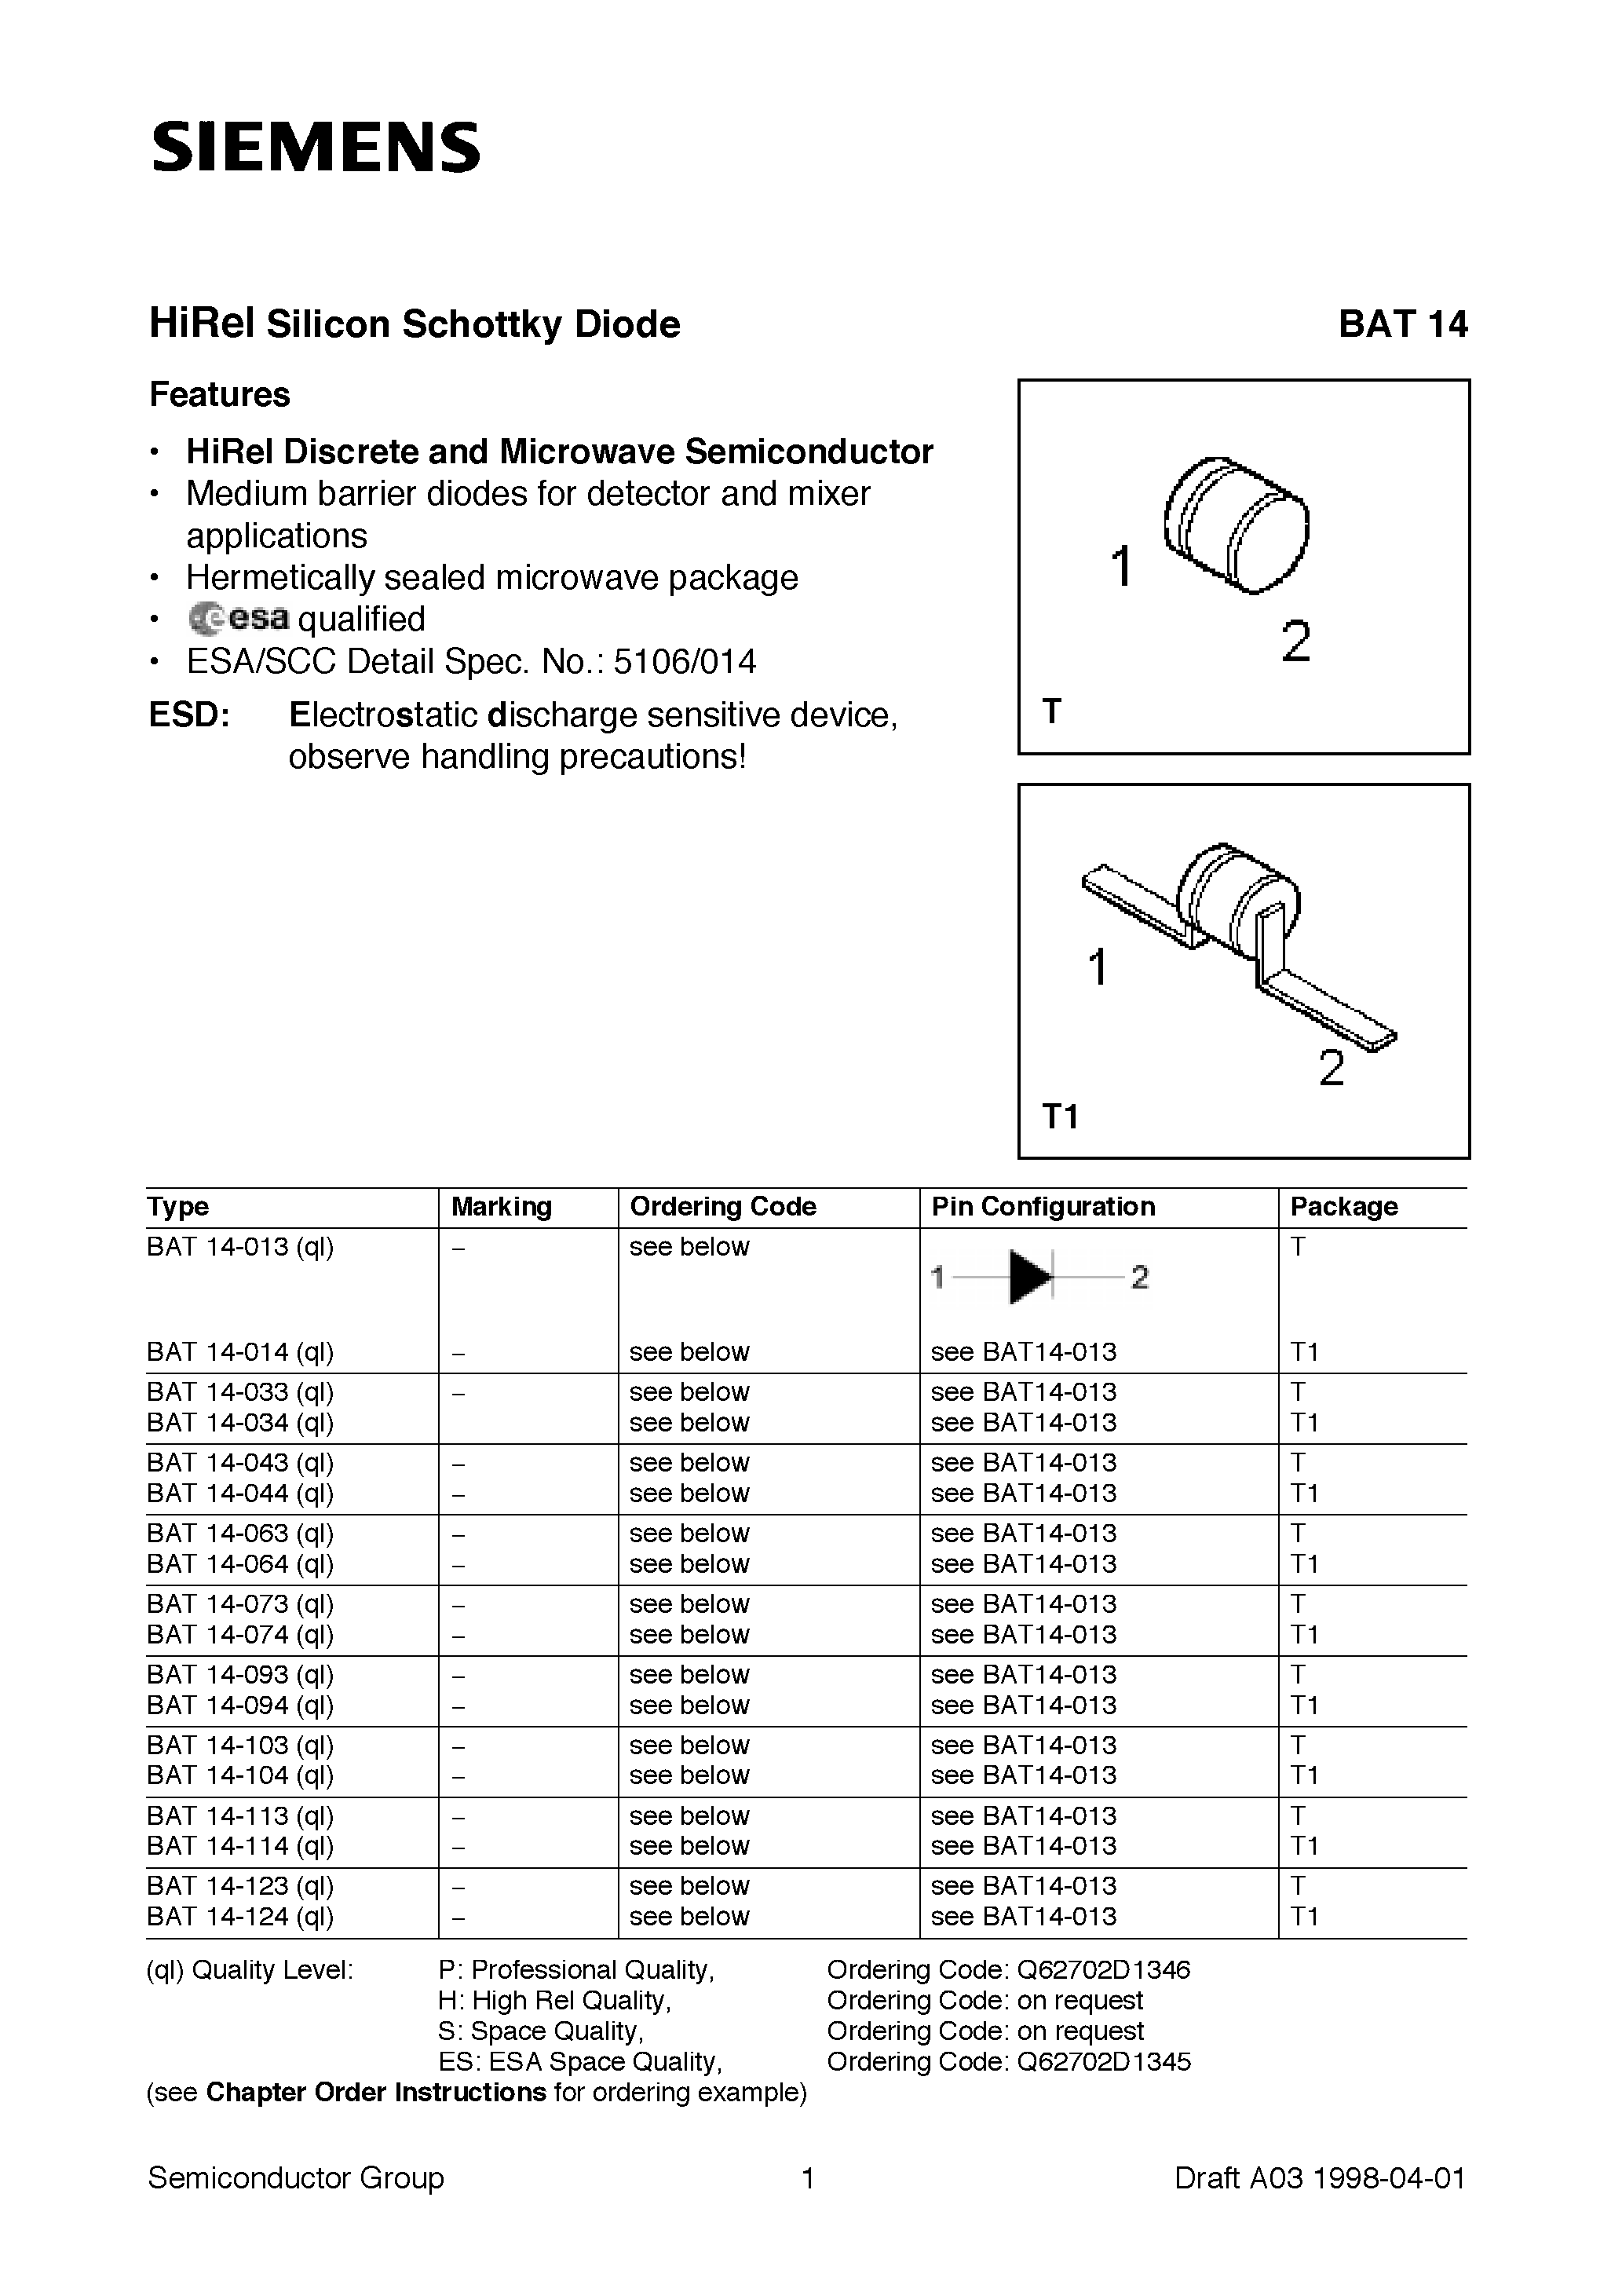 Datasheet BAT14-103 - HiRel Silicon Schottky Diode (HiRel Discrete and Microwave Semiconductor Medium barrier diodes for detector and mixer applications) page 1